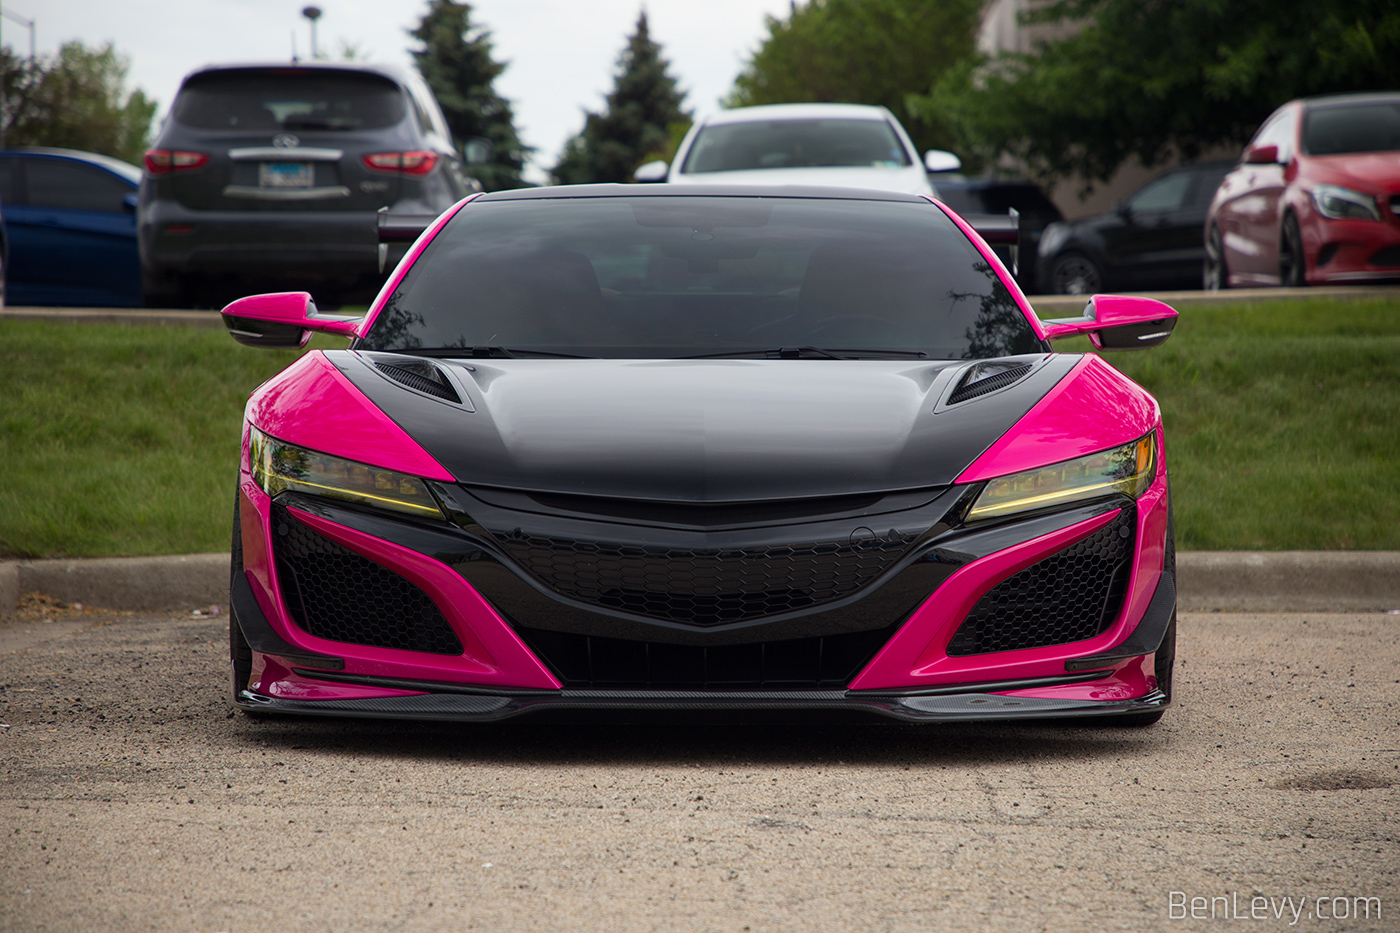 JNC1 Acura NSX with Yellow-Tinted Headlights